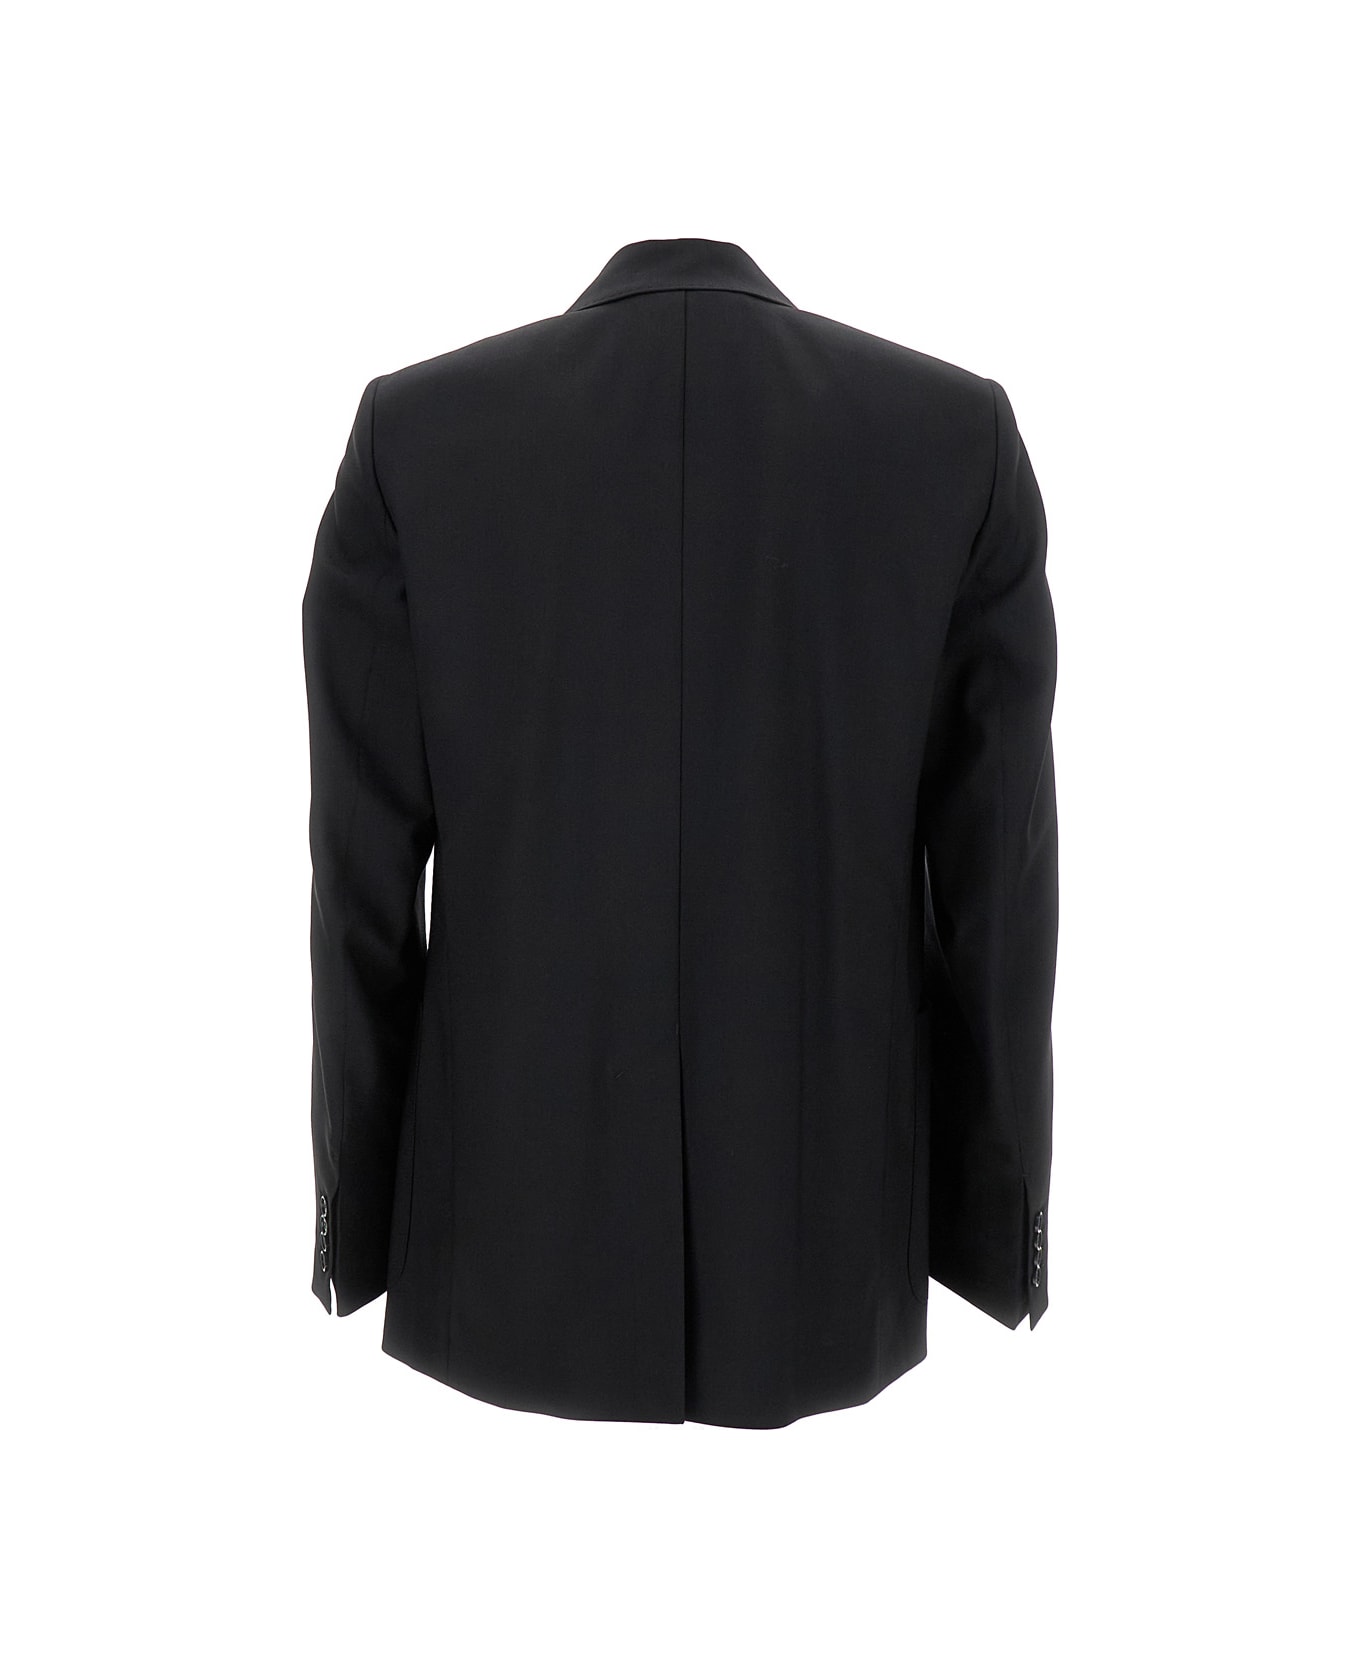 Ami Alexandre Mattiussi Black Double Breasted Blazer With Buttons In Wool Man - BLACK